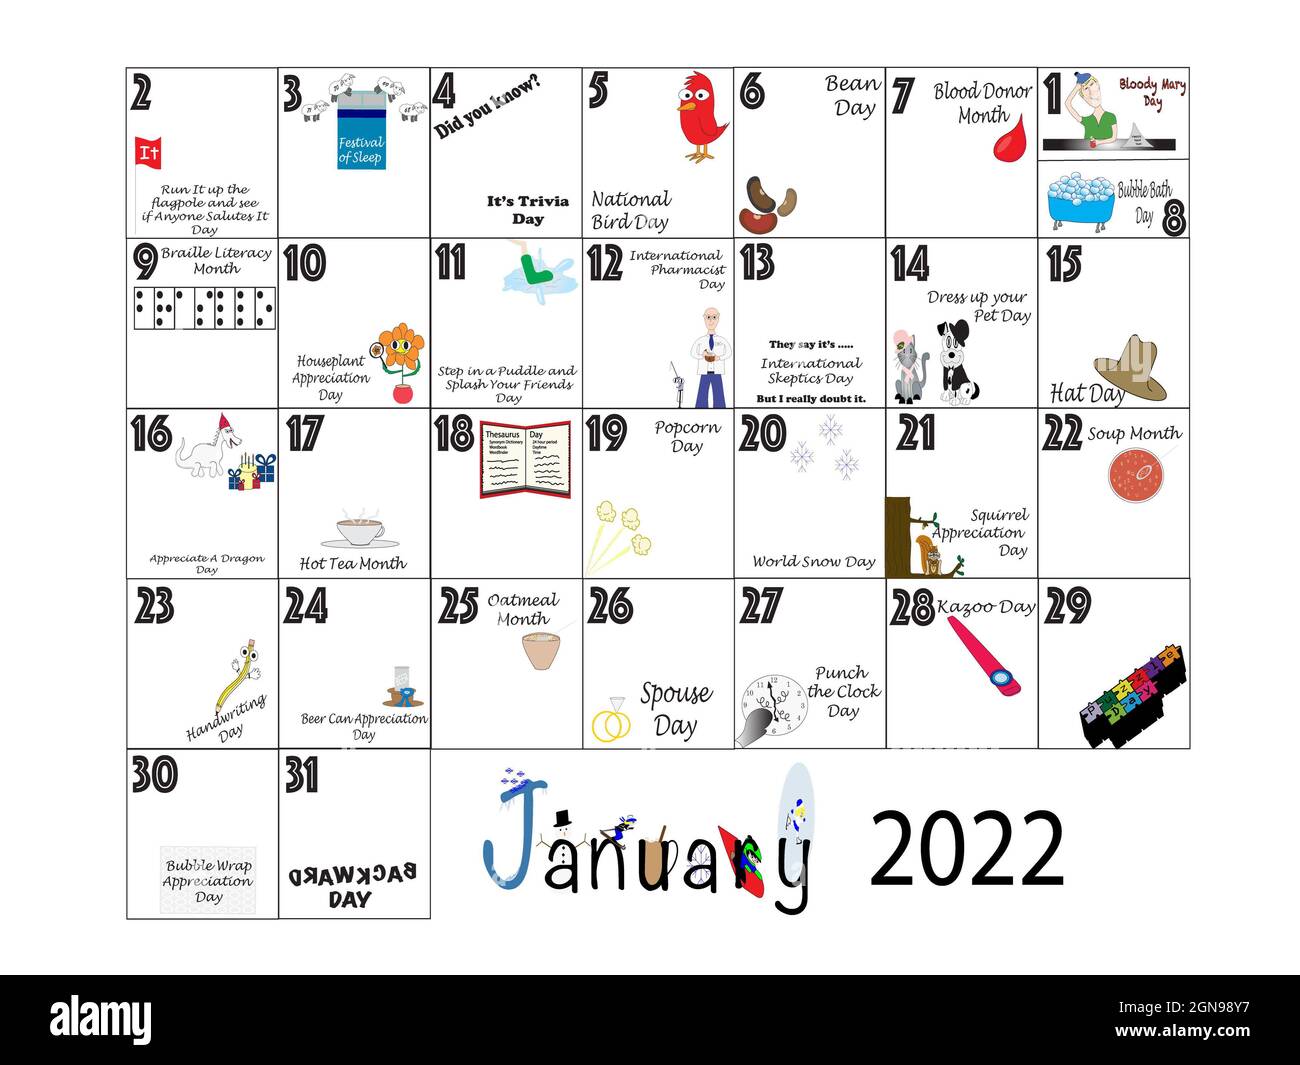 Funny Holiday Calendar 2022 January 2022 Illustrated Monthly Calendar Of Quirky Holidays And Unusual  Celebrations In Colorful Graphics On White Stock Photo - Alamy